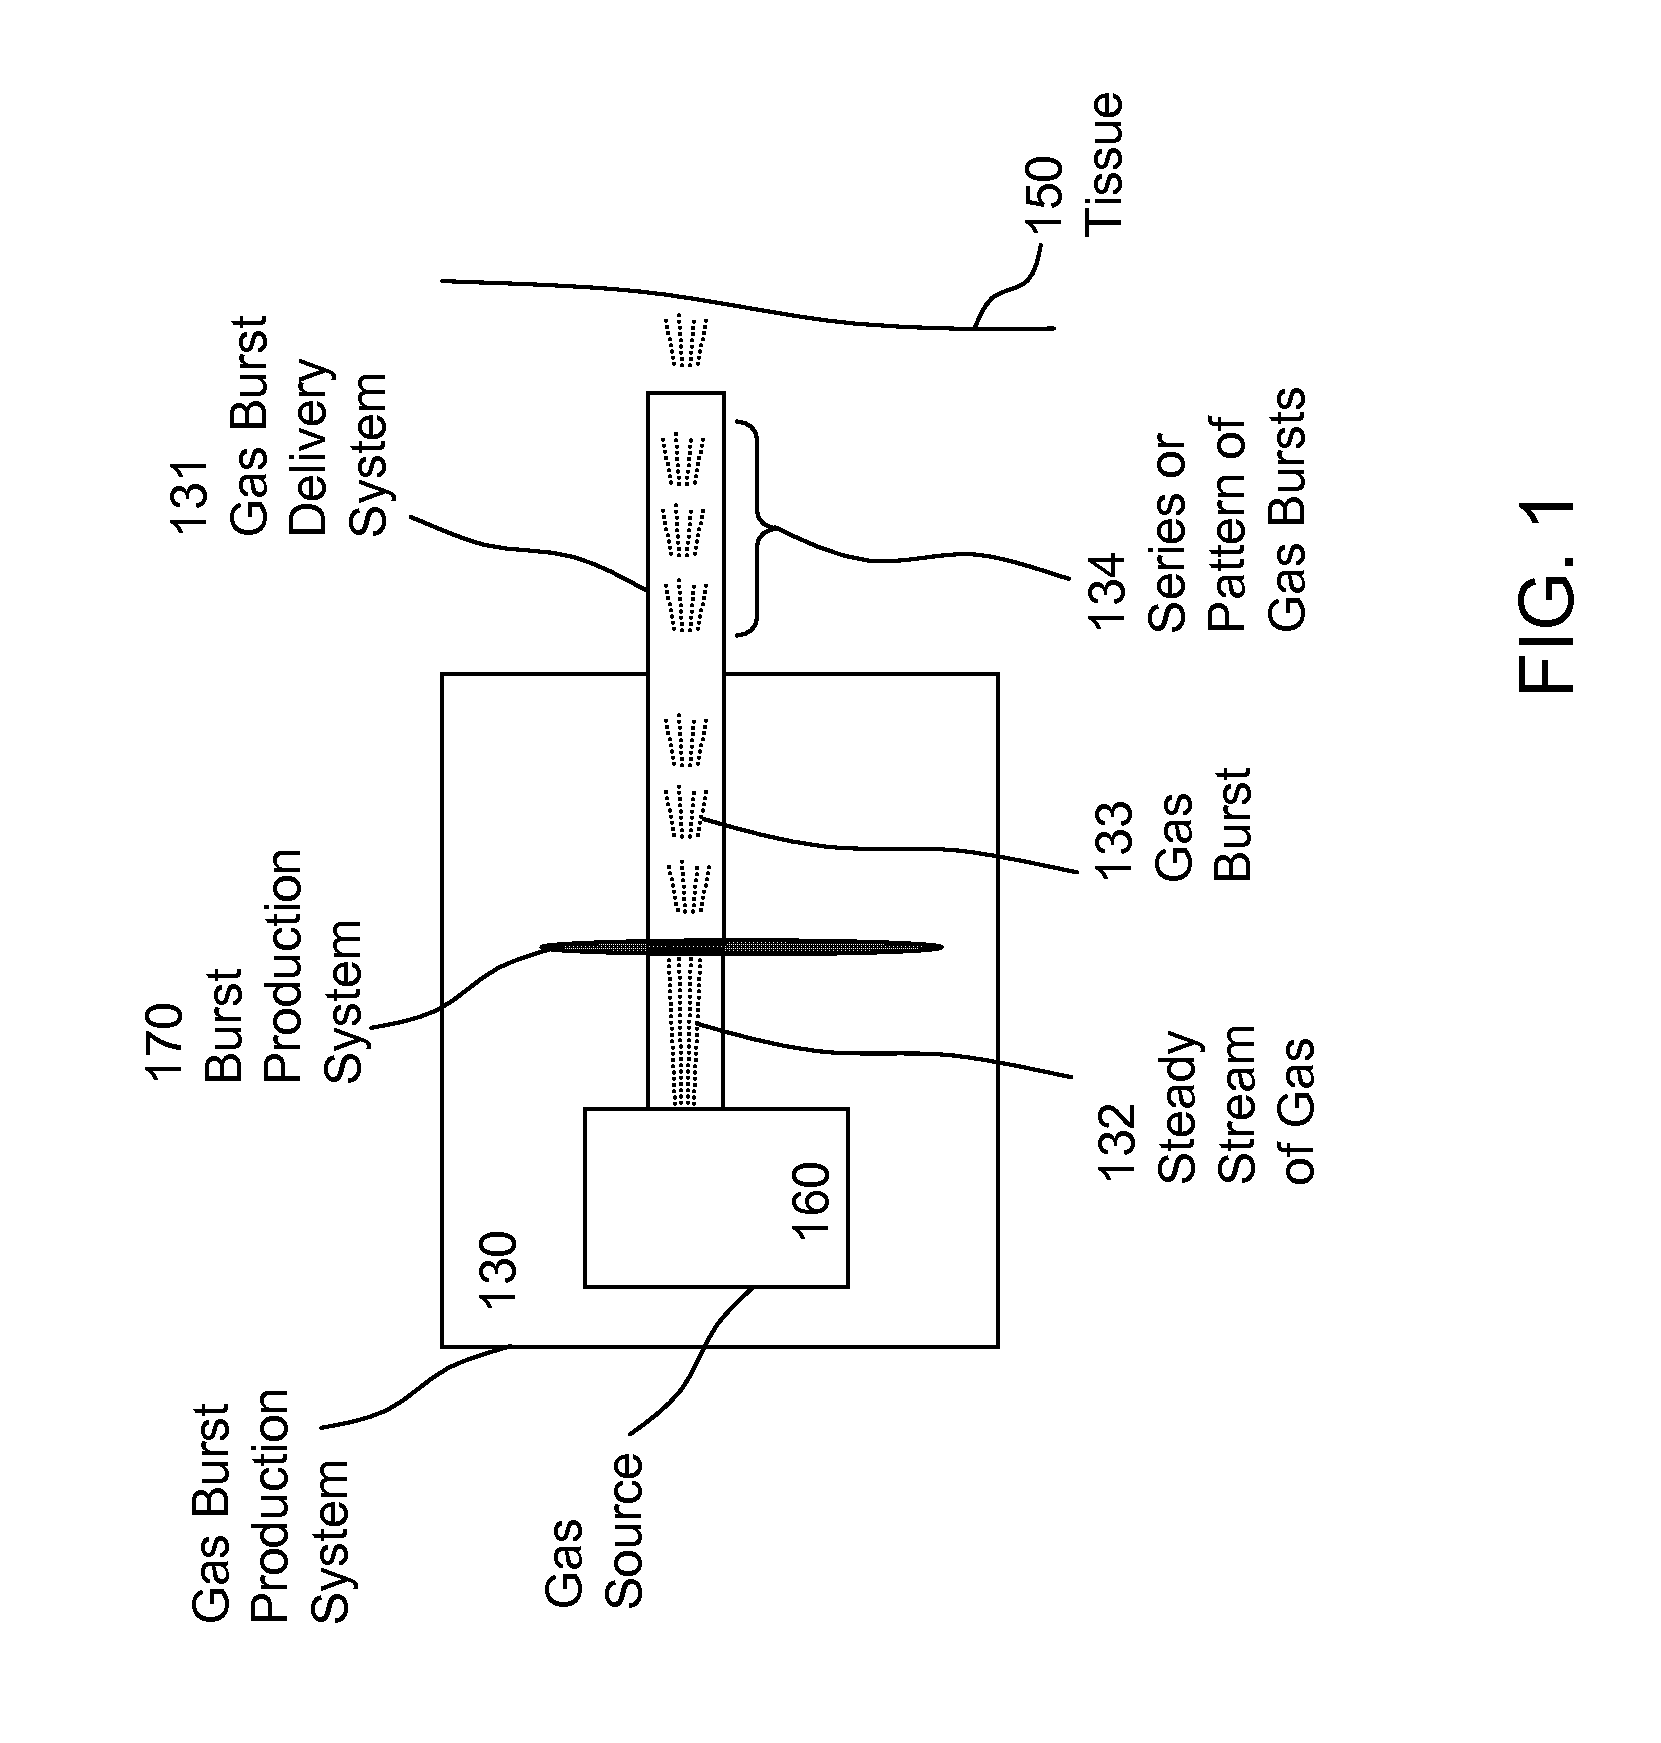 Method for Reducing Pain of Dermatological Treatments